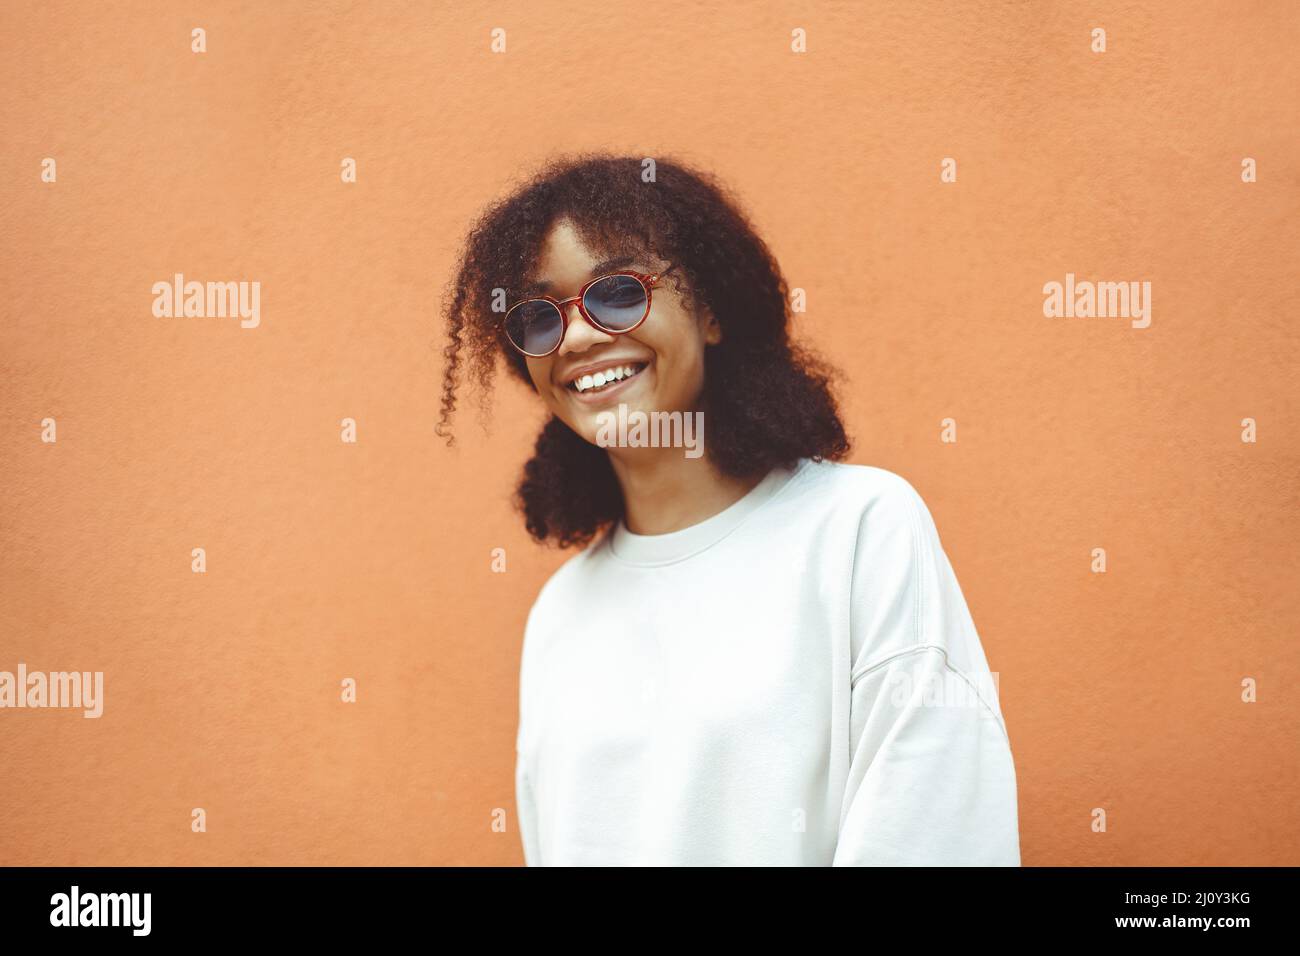 African ethnicity young woman in stylish sunglasses Stock Photo